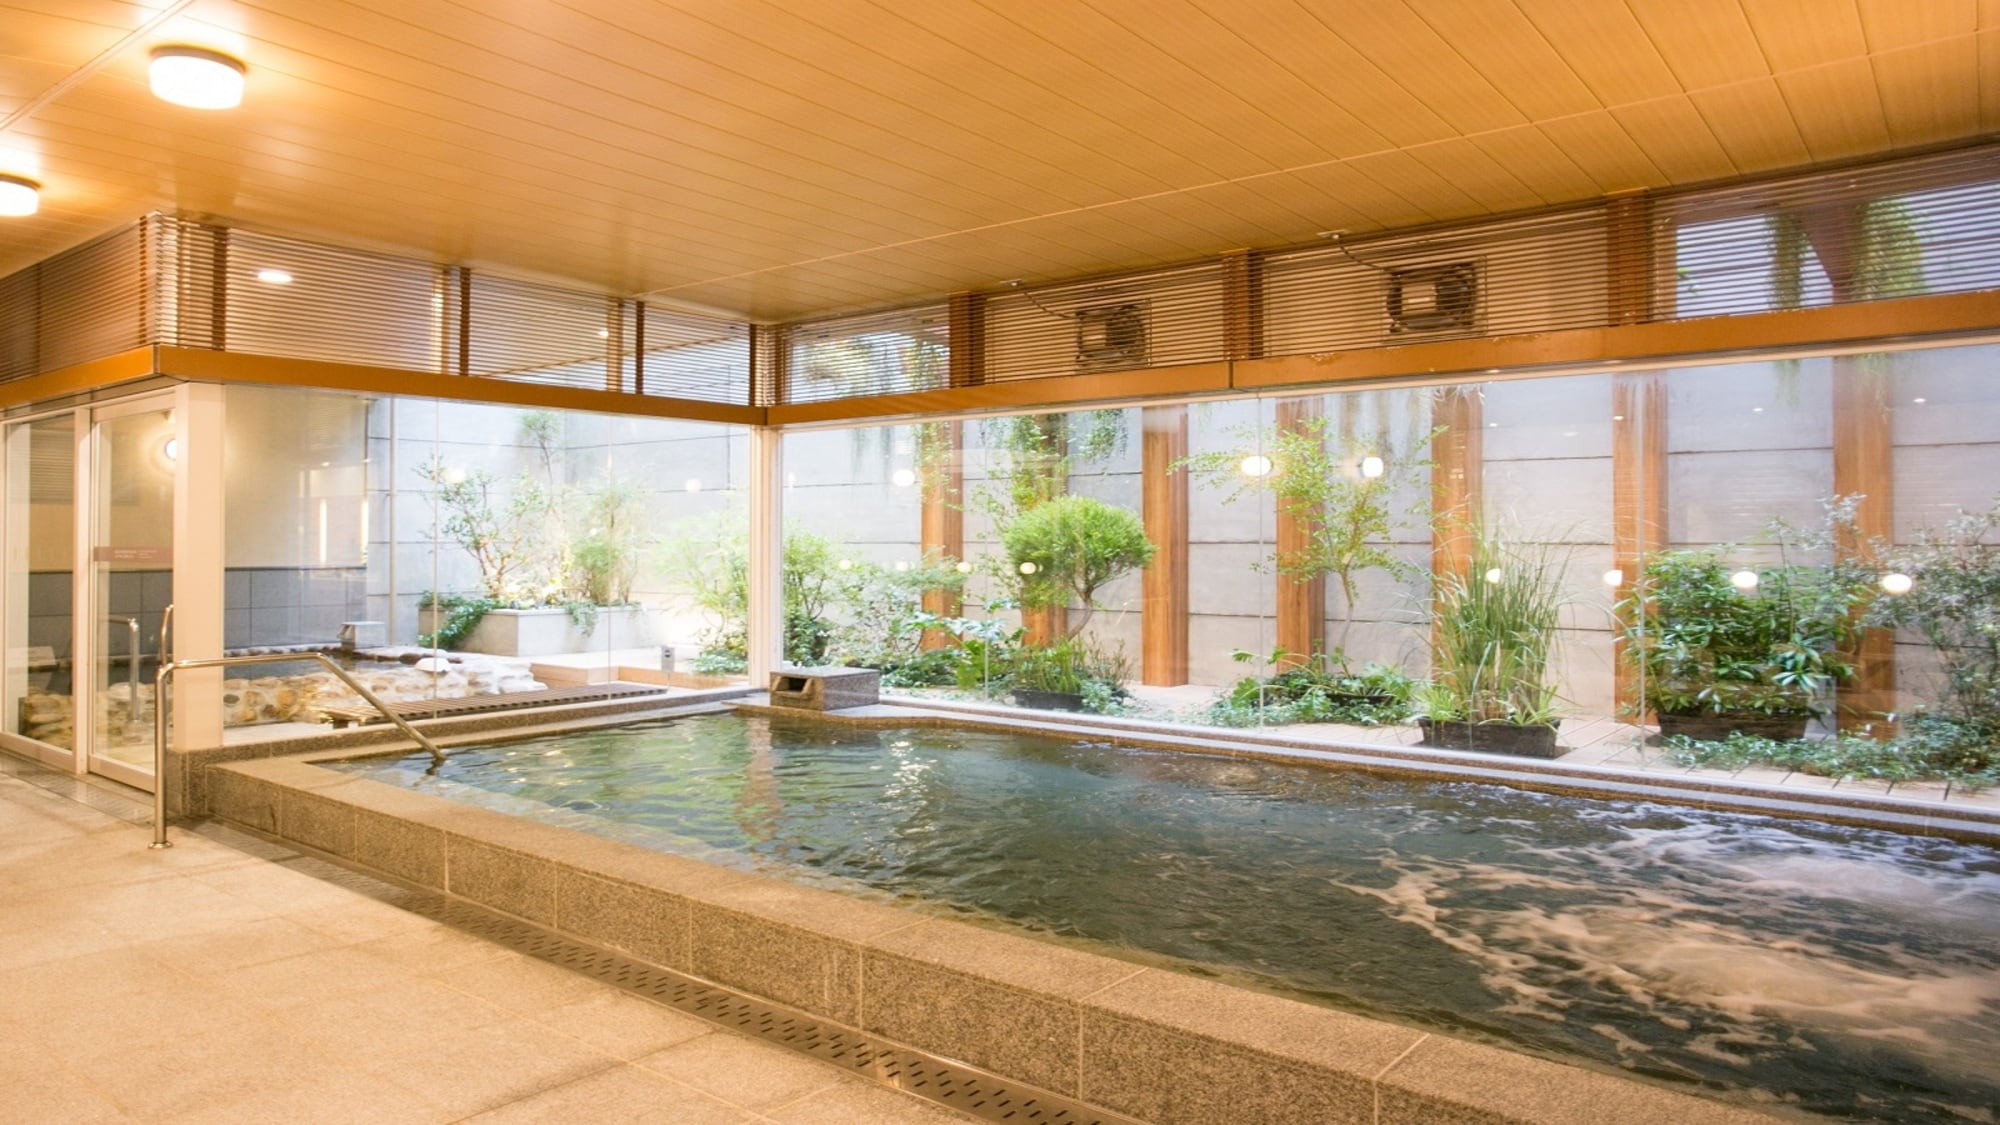 Large public bath with natural hot springs 15: 00-25: 00 6: 00-9: 30